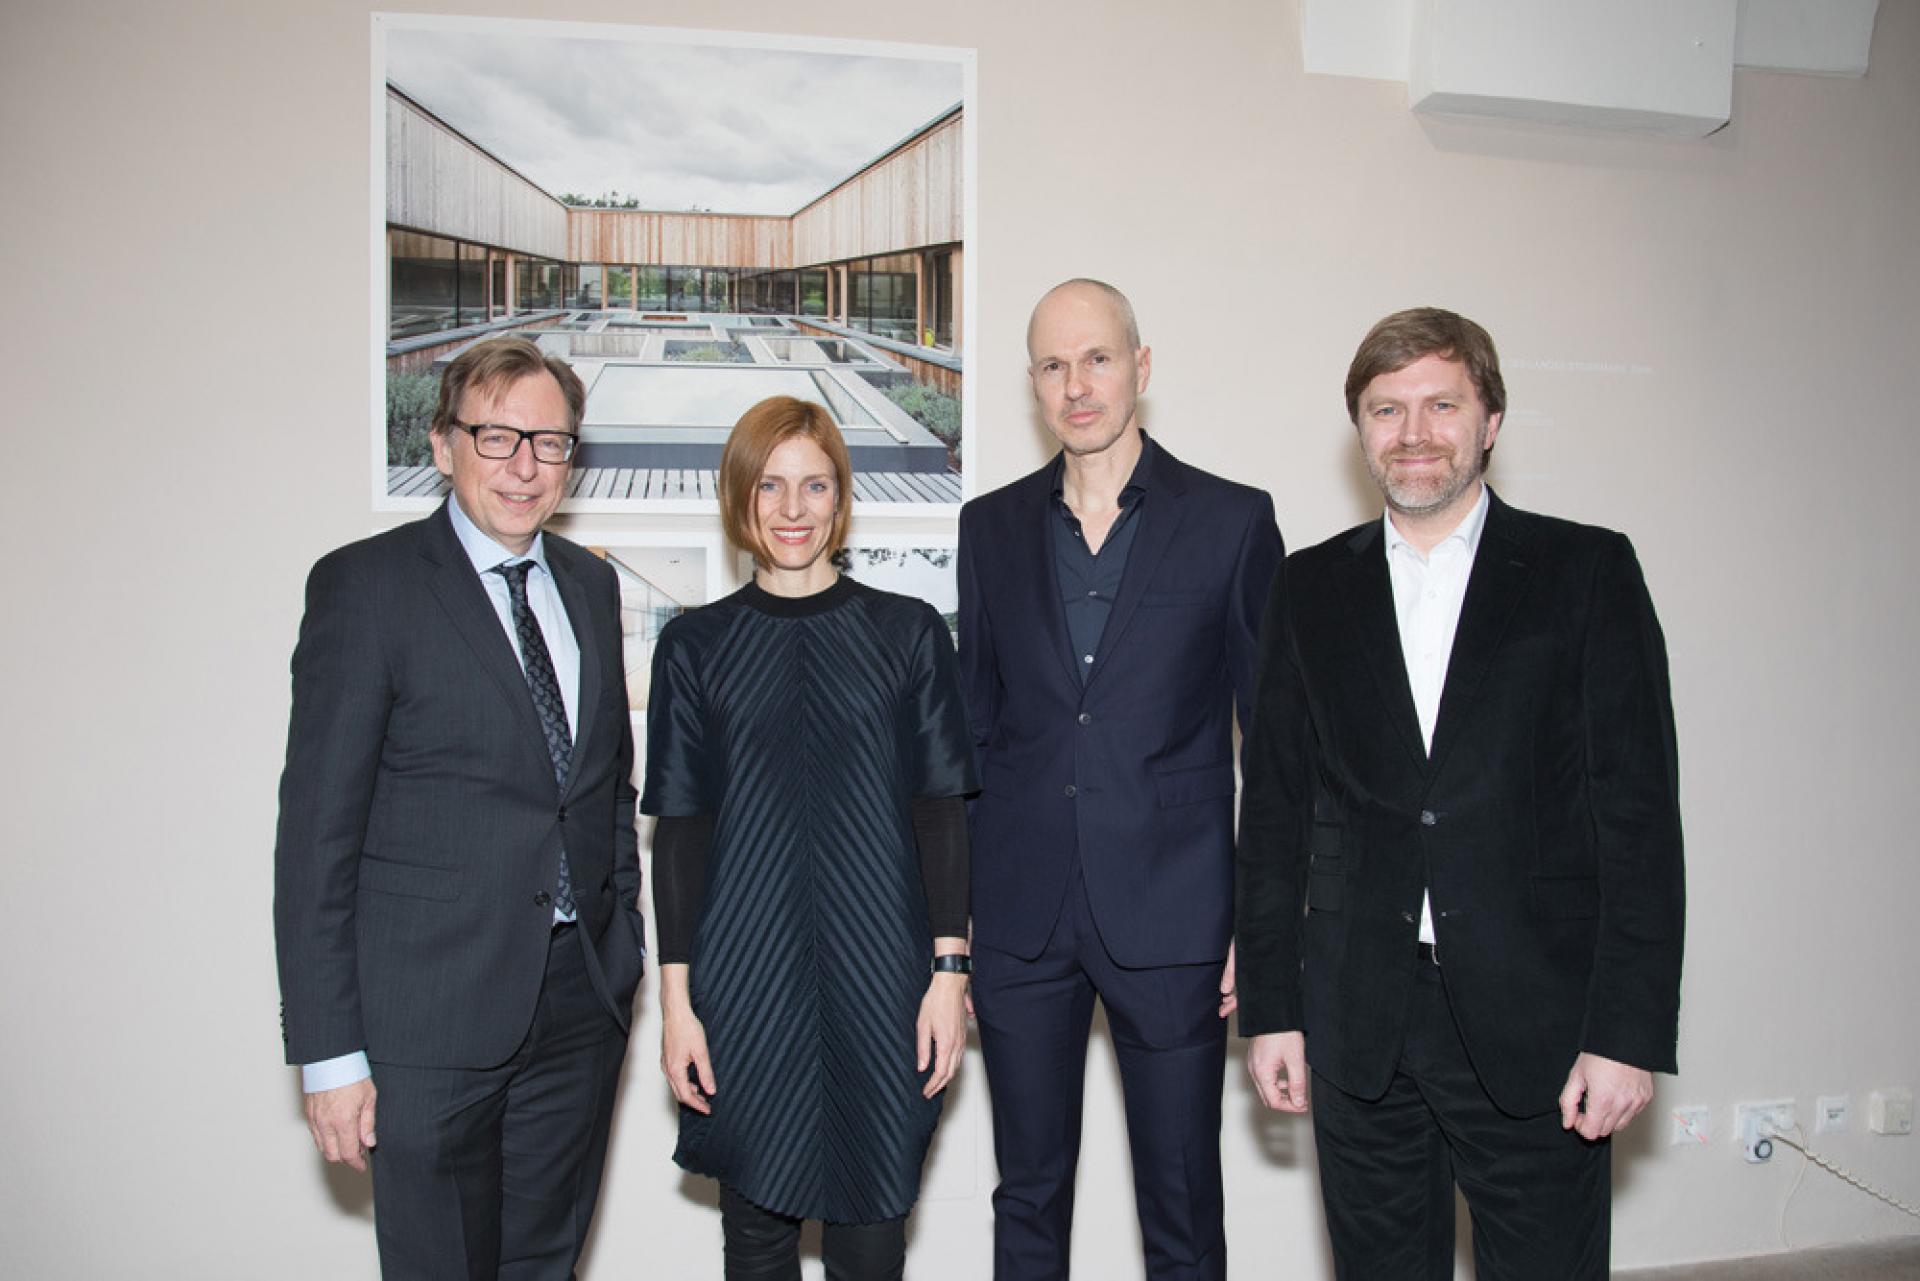 Christian Buchmann (Regional Minister for Culture, Province of Styria), Tina Gregorič (invited curator), Dietger Wissounig (awarded architect) and Markus Bogensberger (director of HDA) | Photo by Thomas Raggam